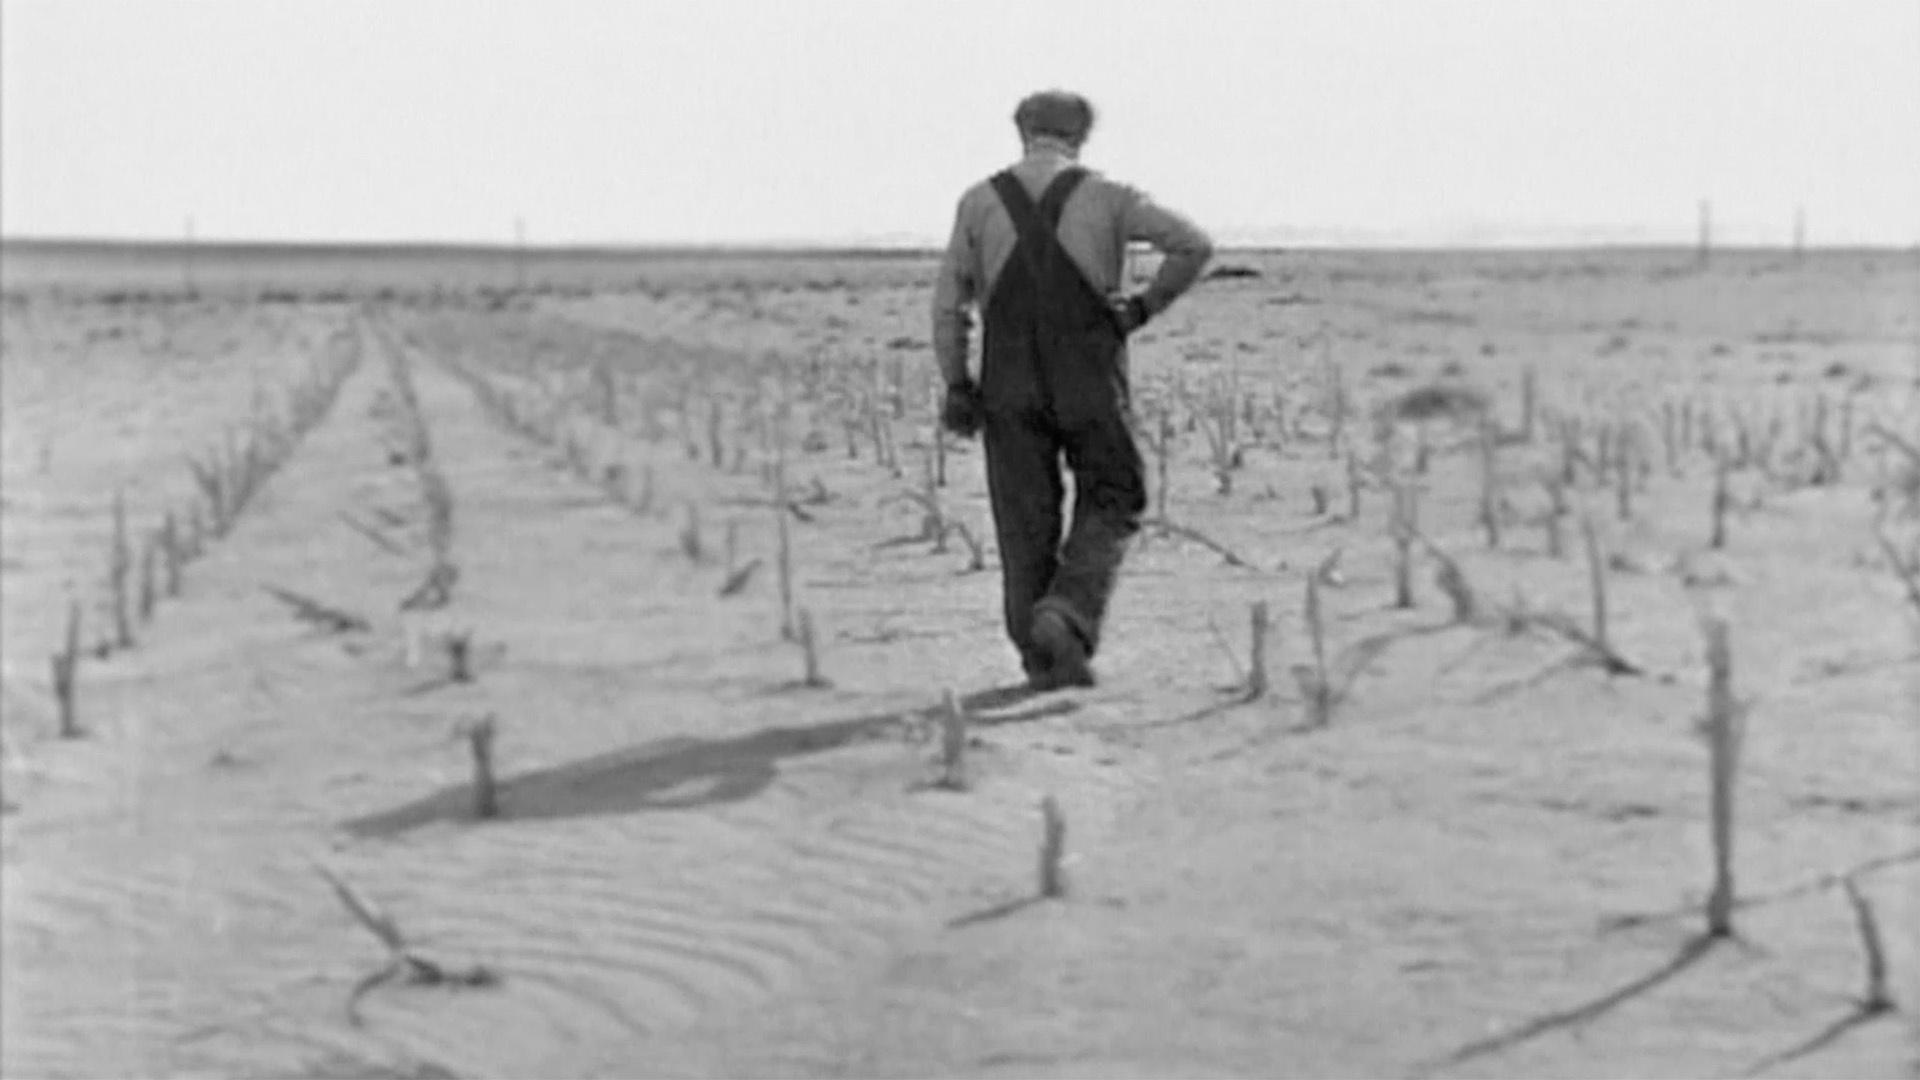 A farmer looking at failed crops during the Dust Bowl